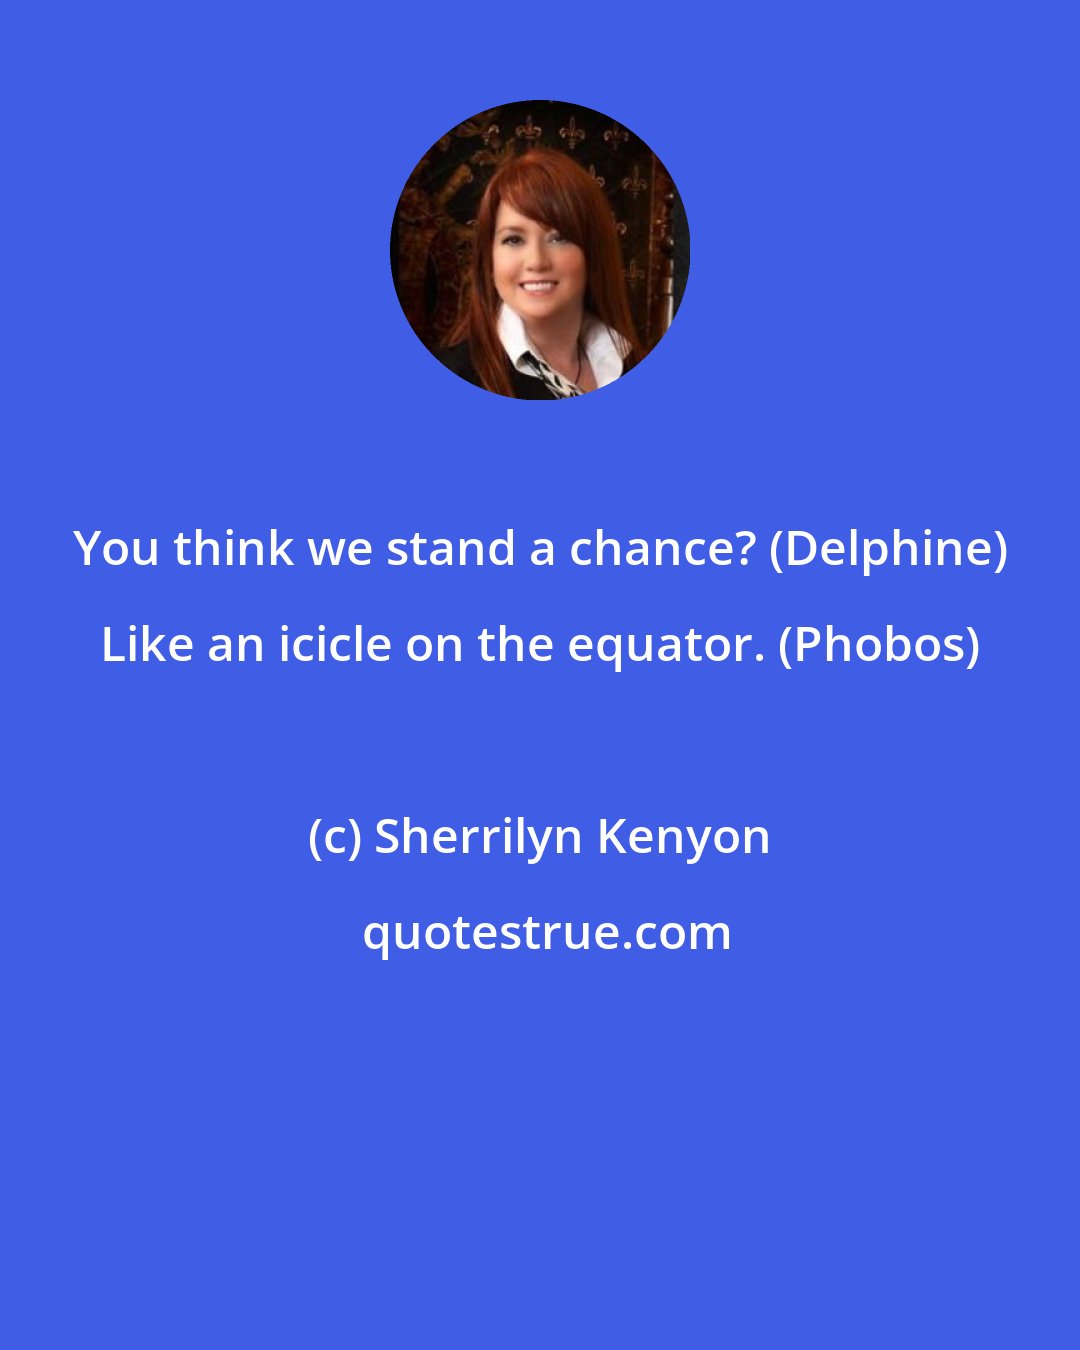 Sherrilyn Kenyon: You think we stand a chance? (Delphine) Like an icicle on the equator. (Phobos)